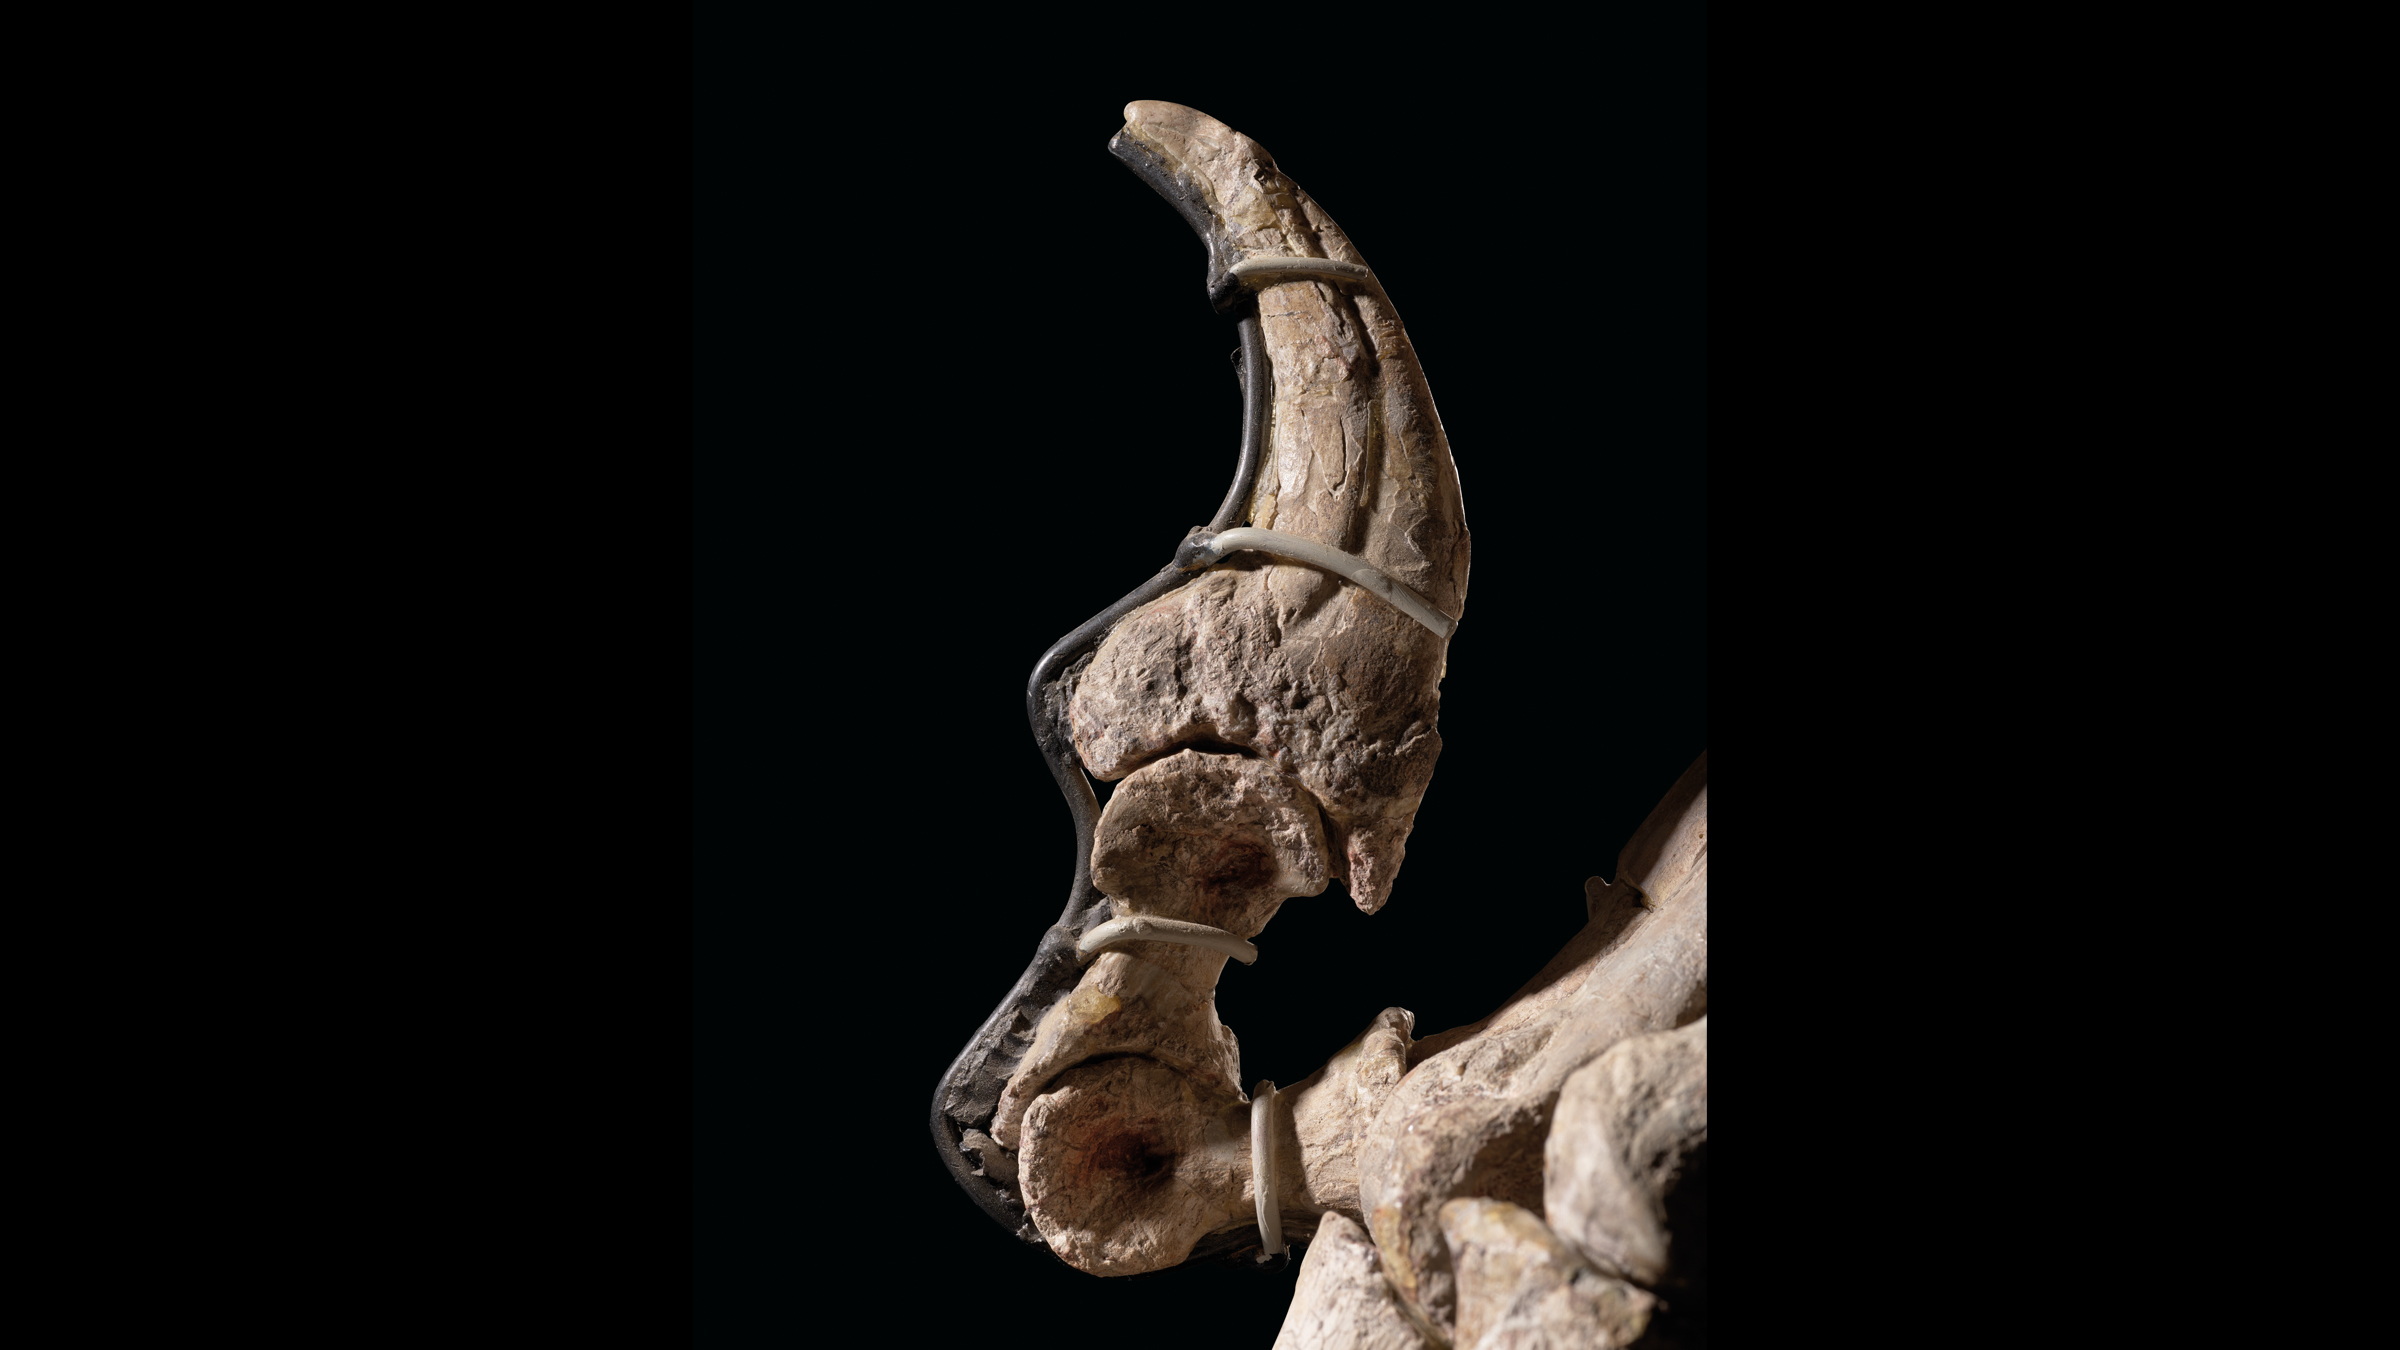 A photo of a Deinonychus claw. Deinonychus likely used its long claws to disembowel prey.